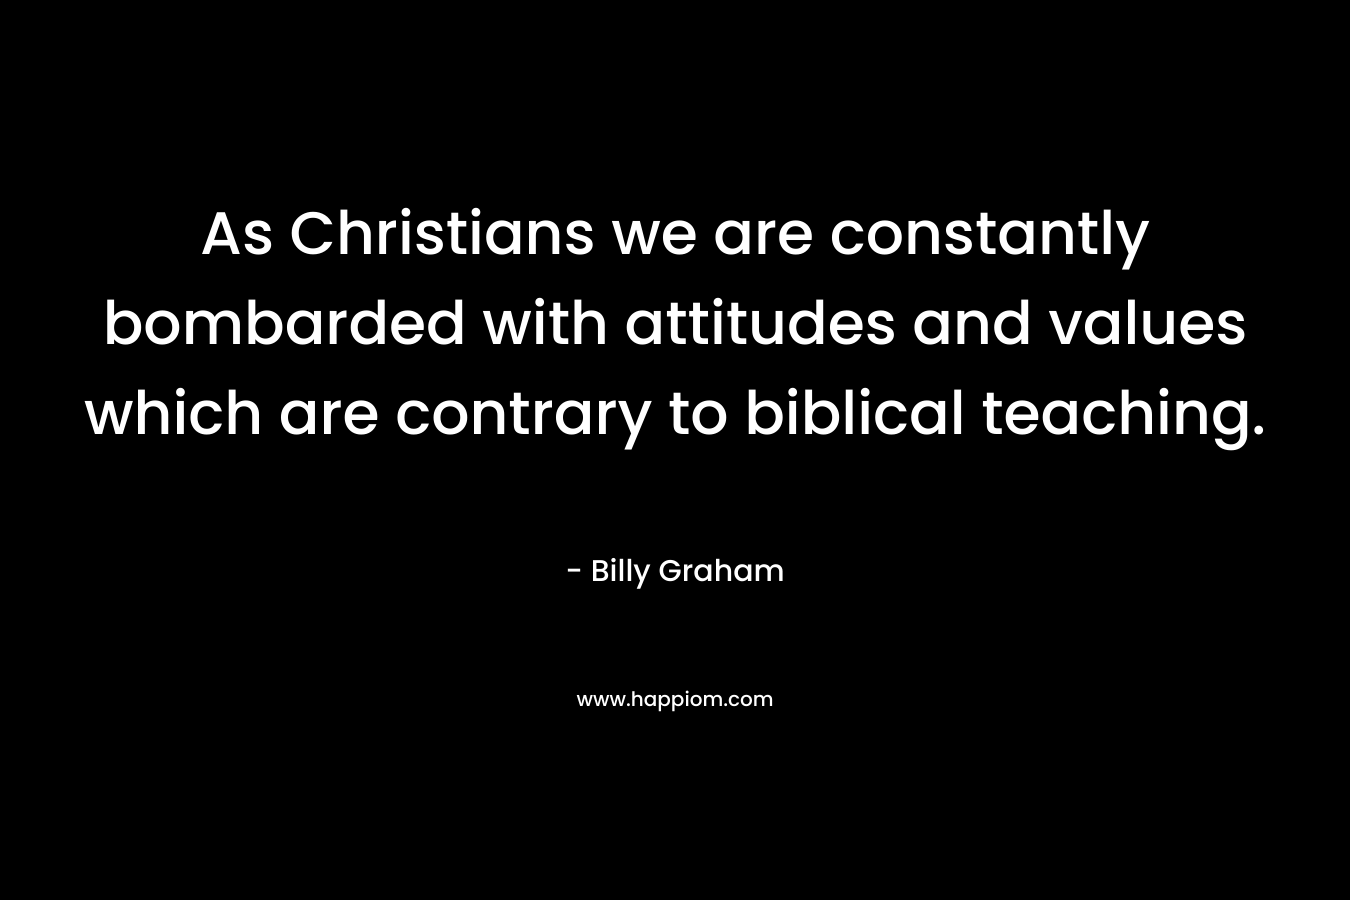 As Christians we are constantly bombarded with attitudes and values which are contrary to biblical teaching. – Billy Graham